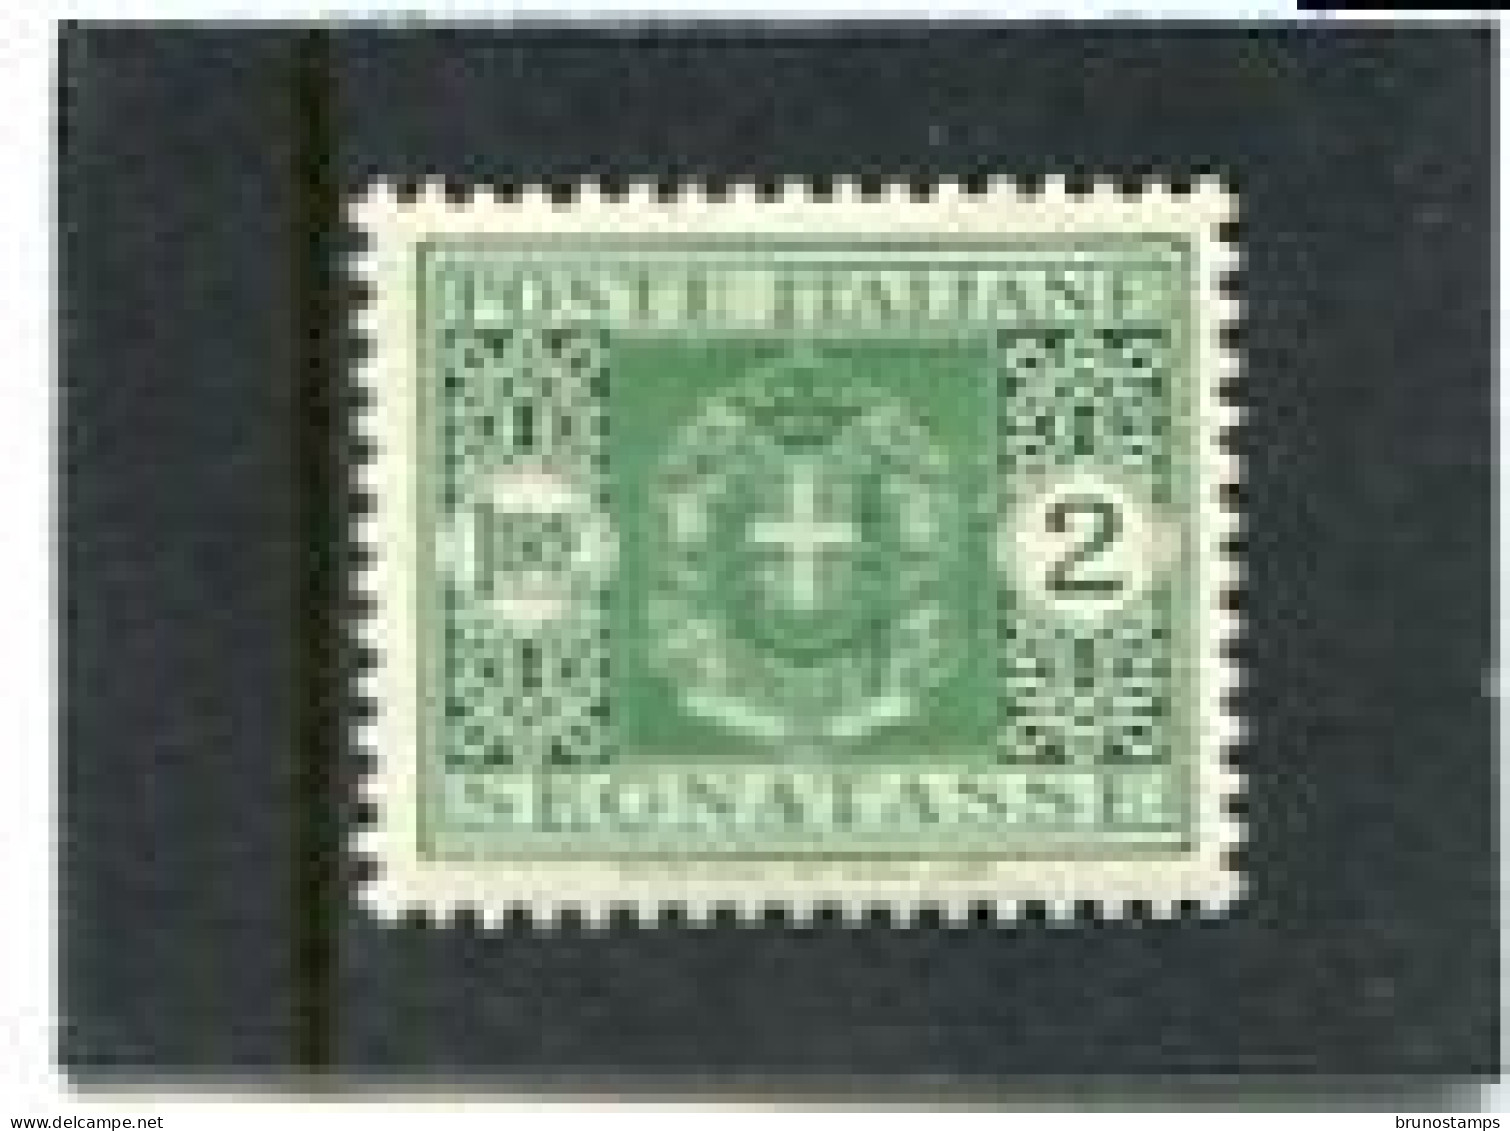 ITALY/ITALIA - 1934  POSTAGE DUE  2 L  MINT NH - Strafport